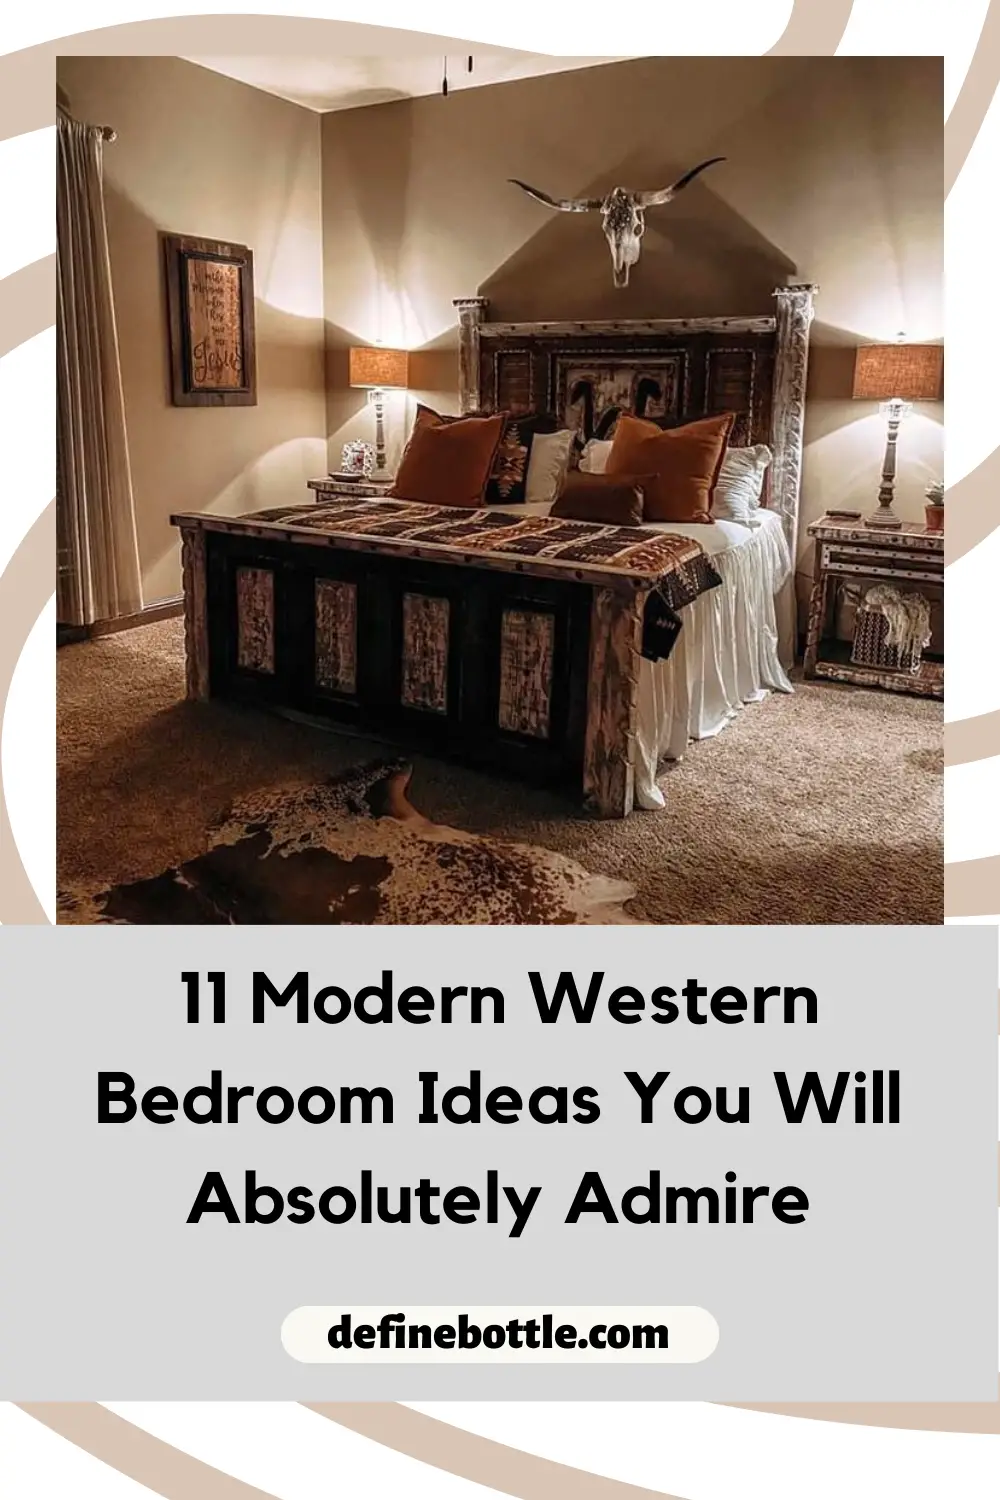 Modern Western Bedroom Ideas You Will Absolutely Admire